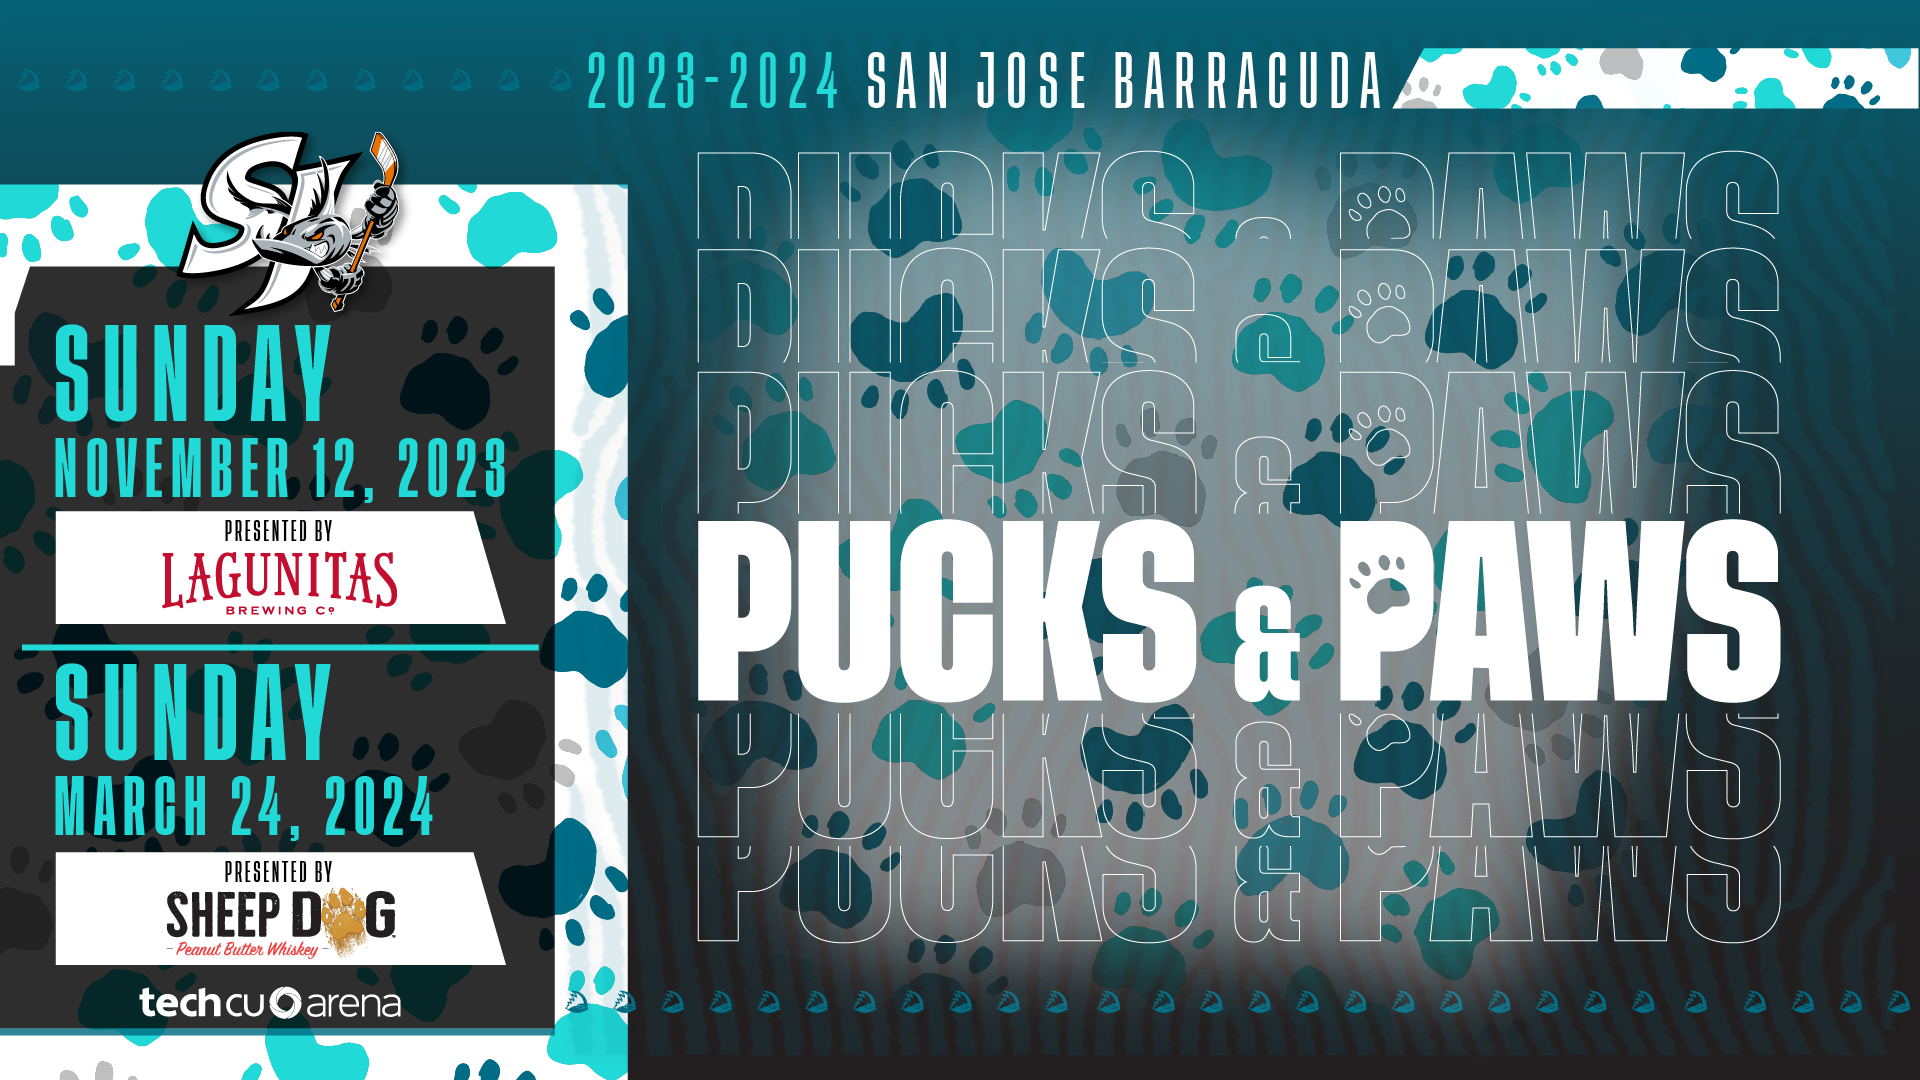 Pucks and Paws November 12, 2023 and March 24, 2024 at Tech CU Arena